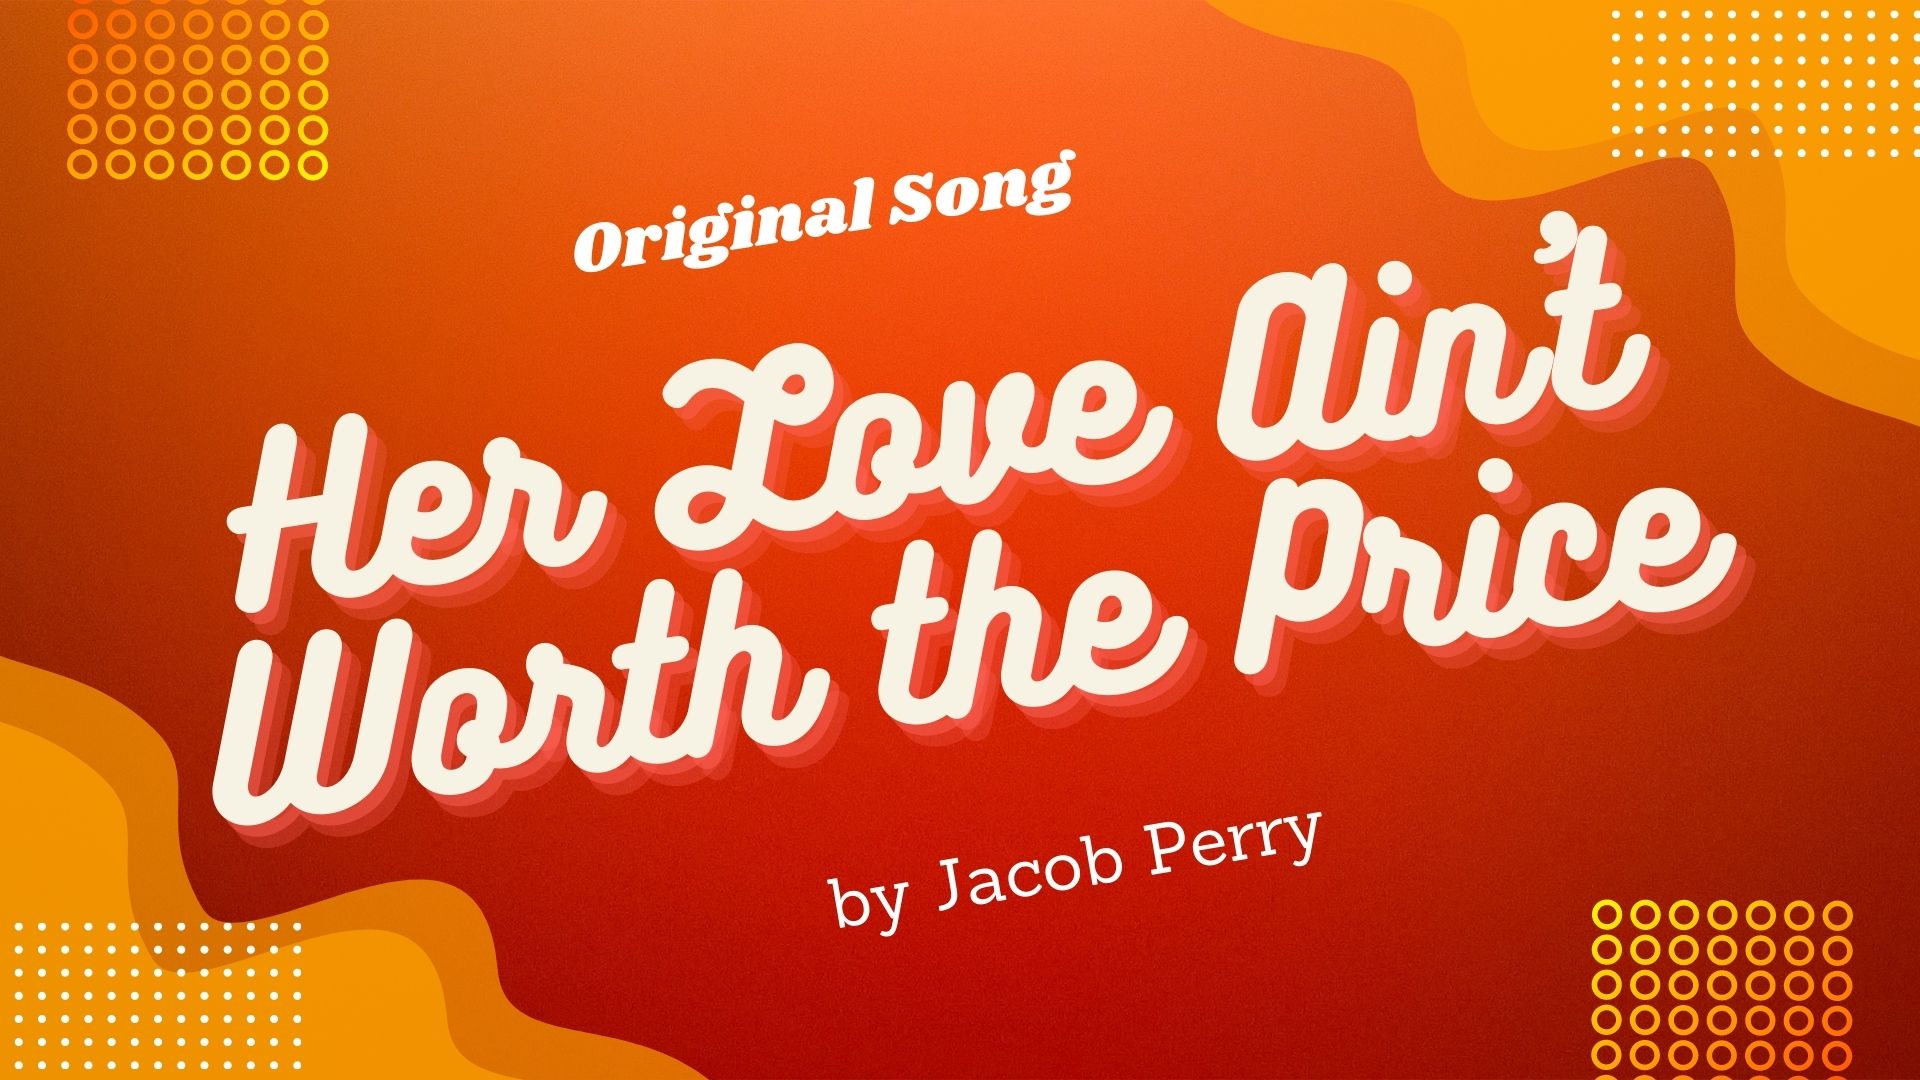 ‘Her Love Ain’t Worth The Price’ is the entertaining new country/folk single from ‘Jacob Perry’.